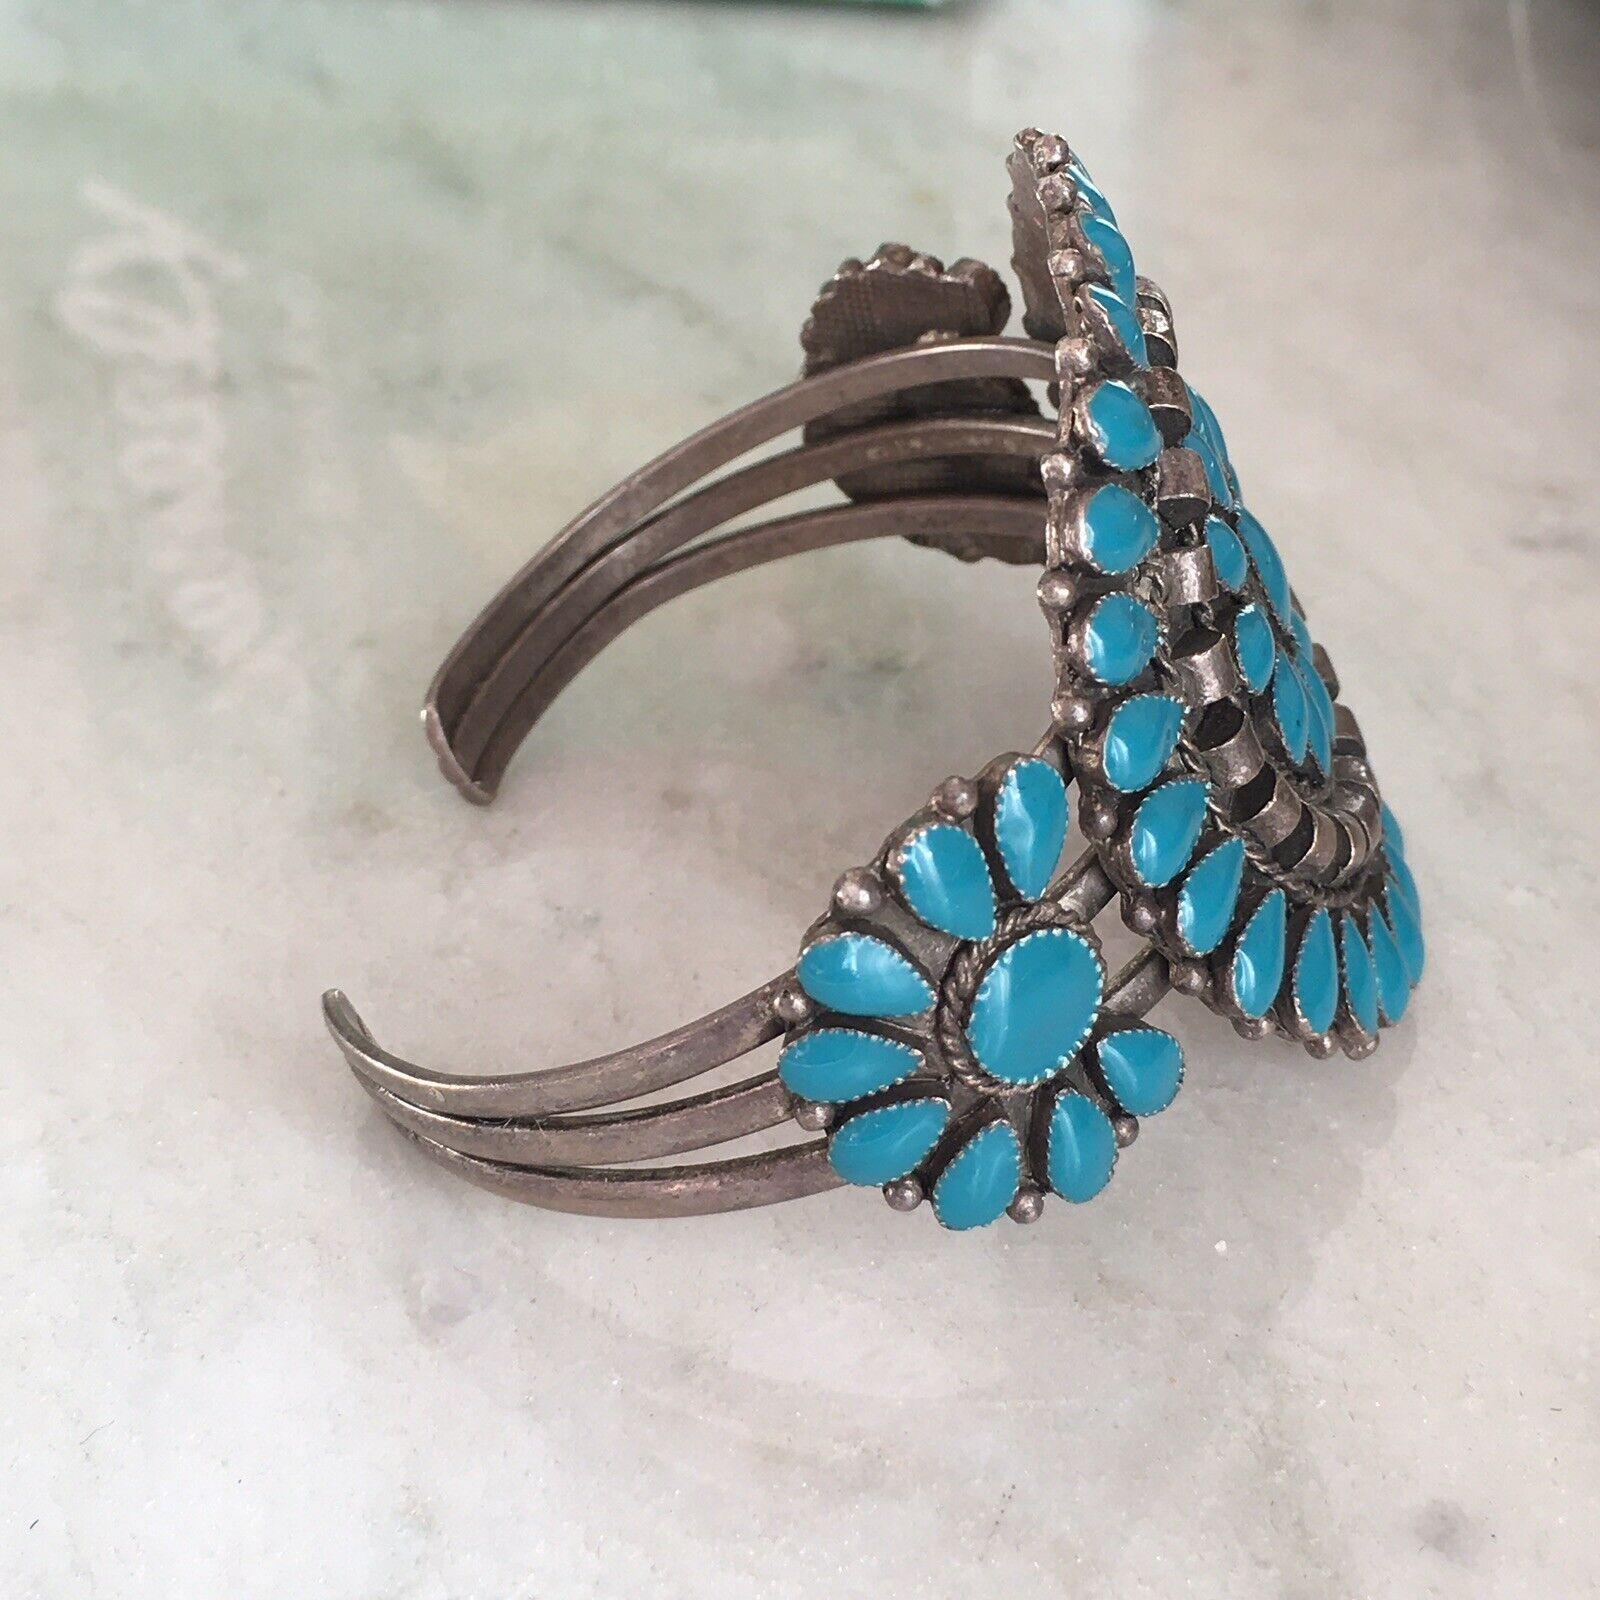 Native American Sterling Silver Hand Made Turquoise Cluster Cuff Bracelet Weighting 31.4 grams, tested Sterling in excellent condition, no missing stones possibly Zuni